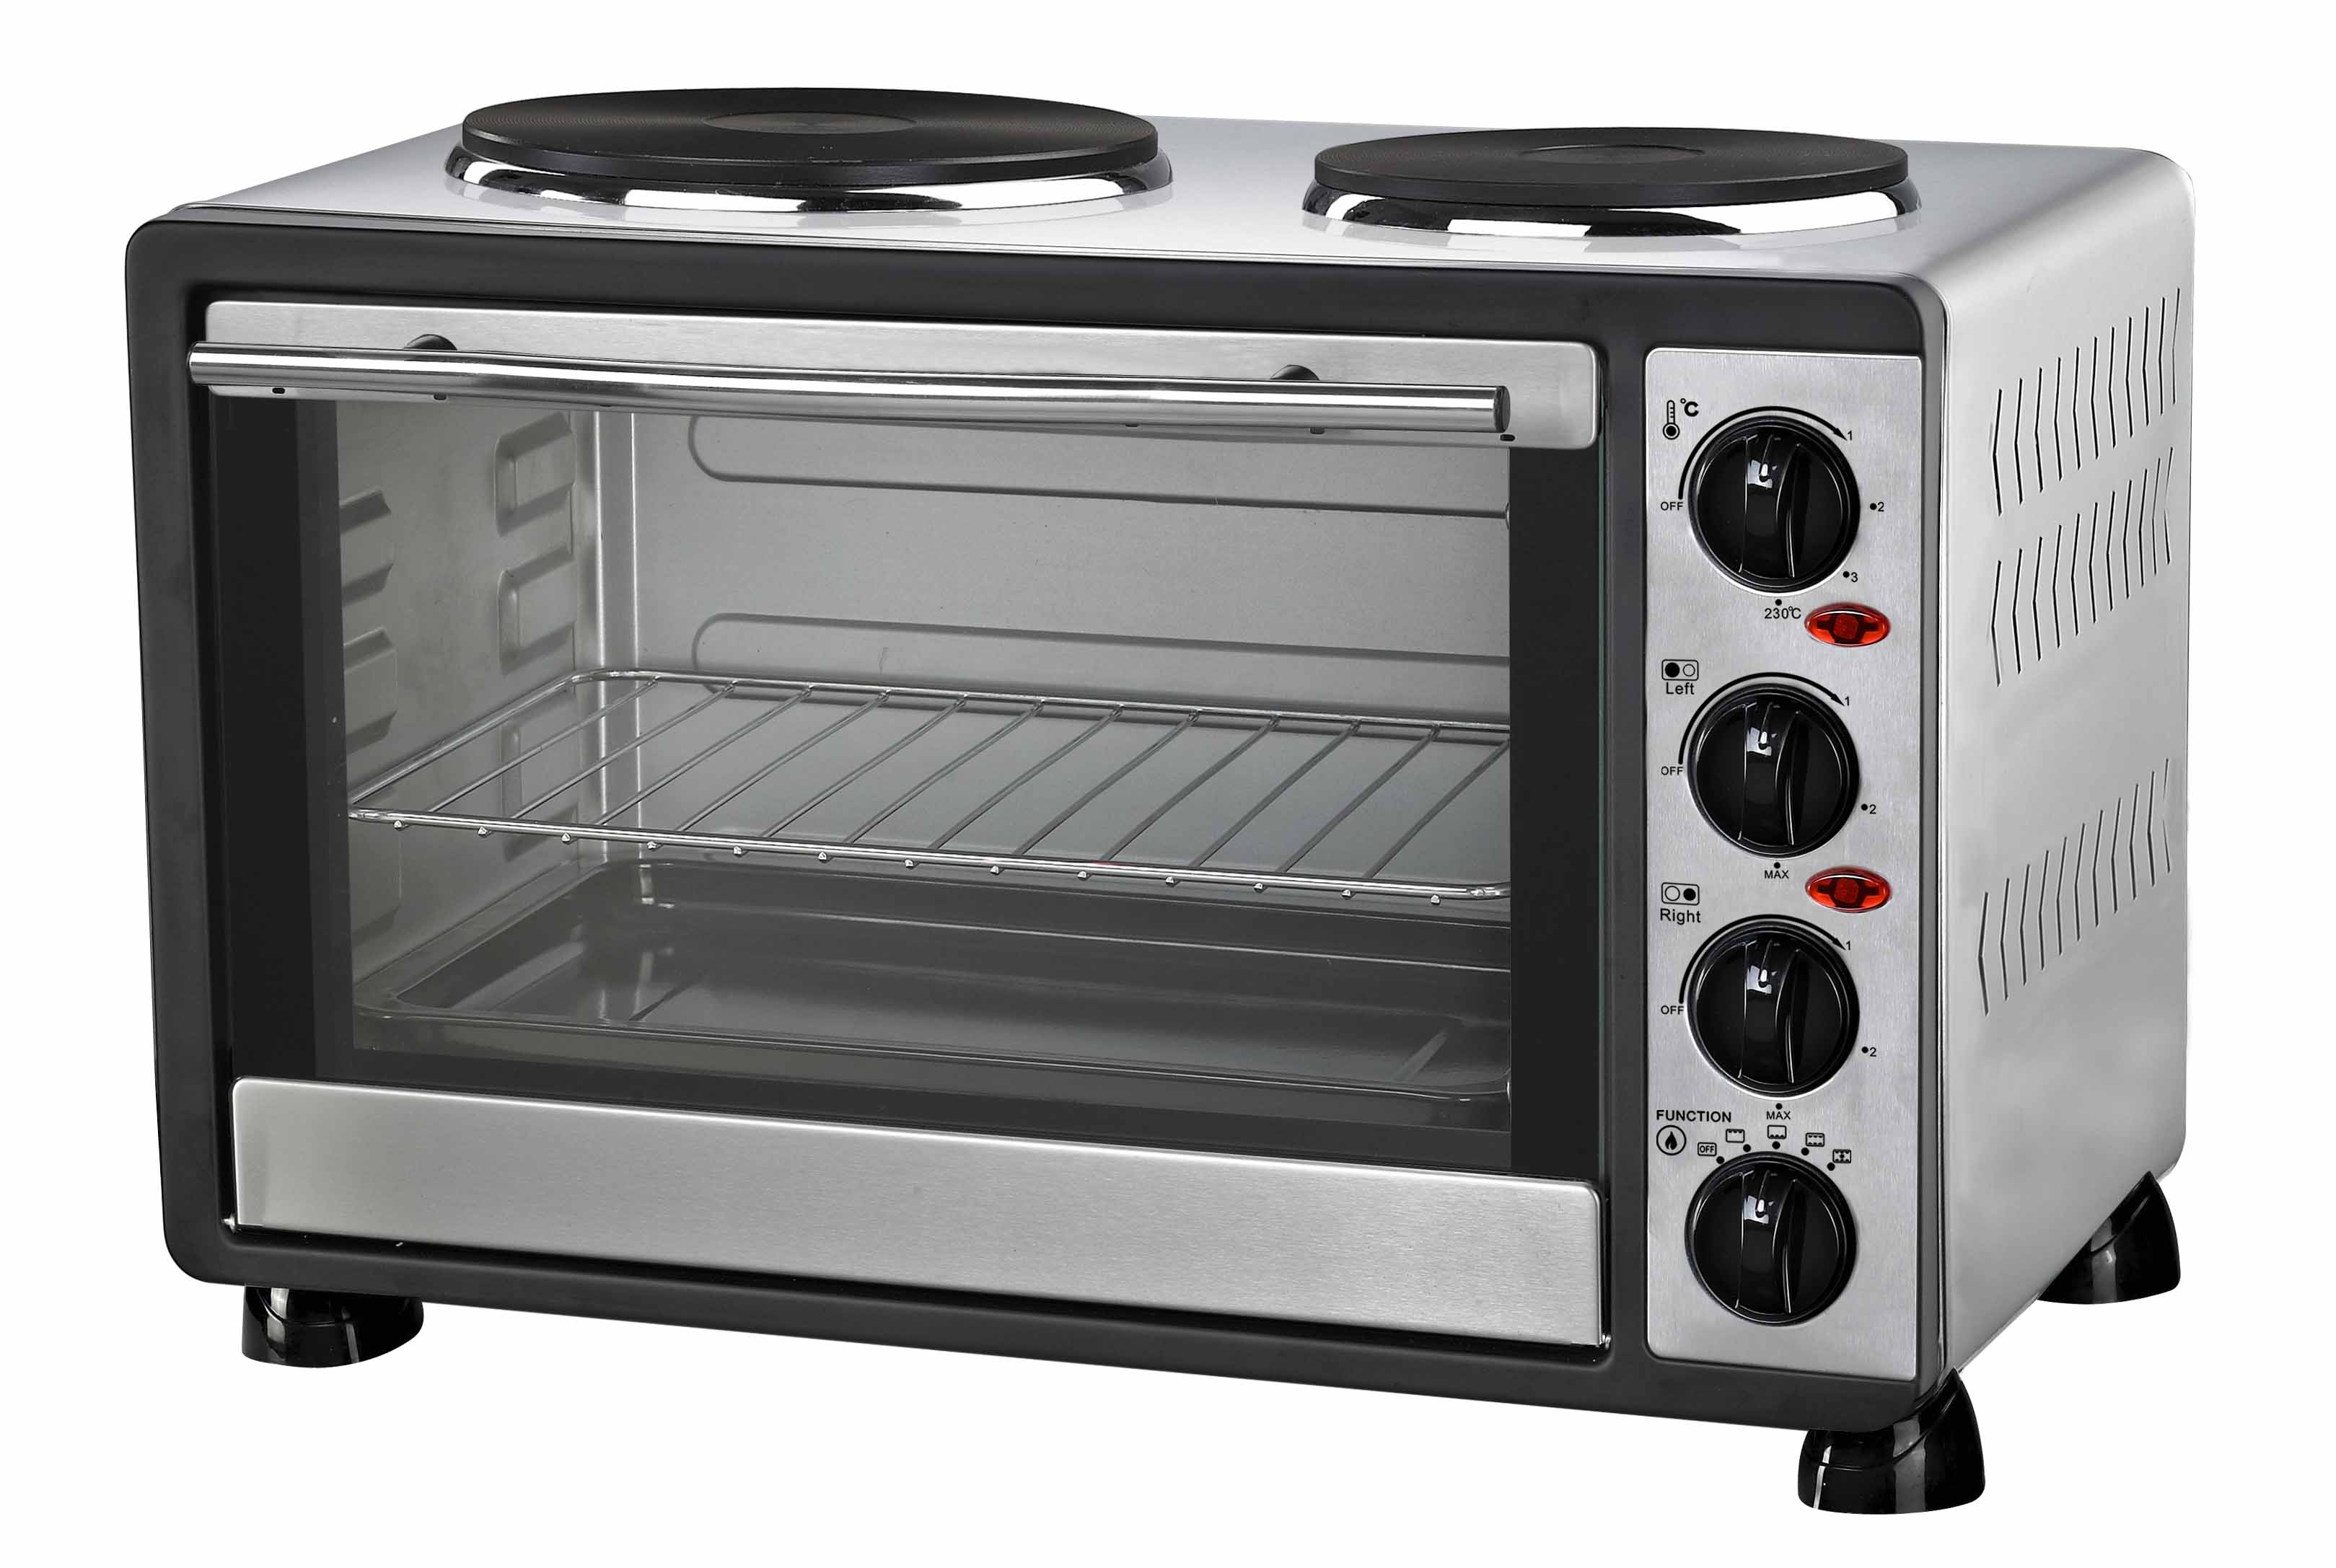 30 LITER OVEN WITH DUAL HOBS